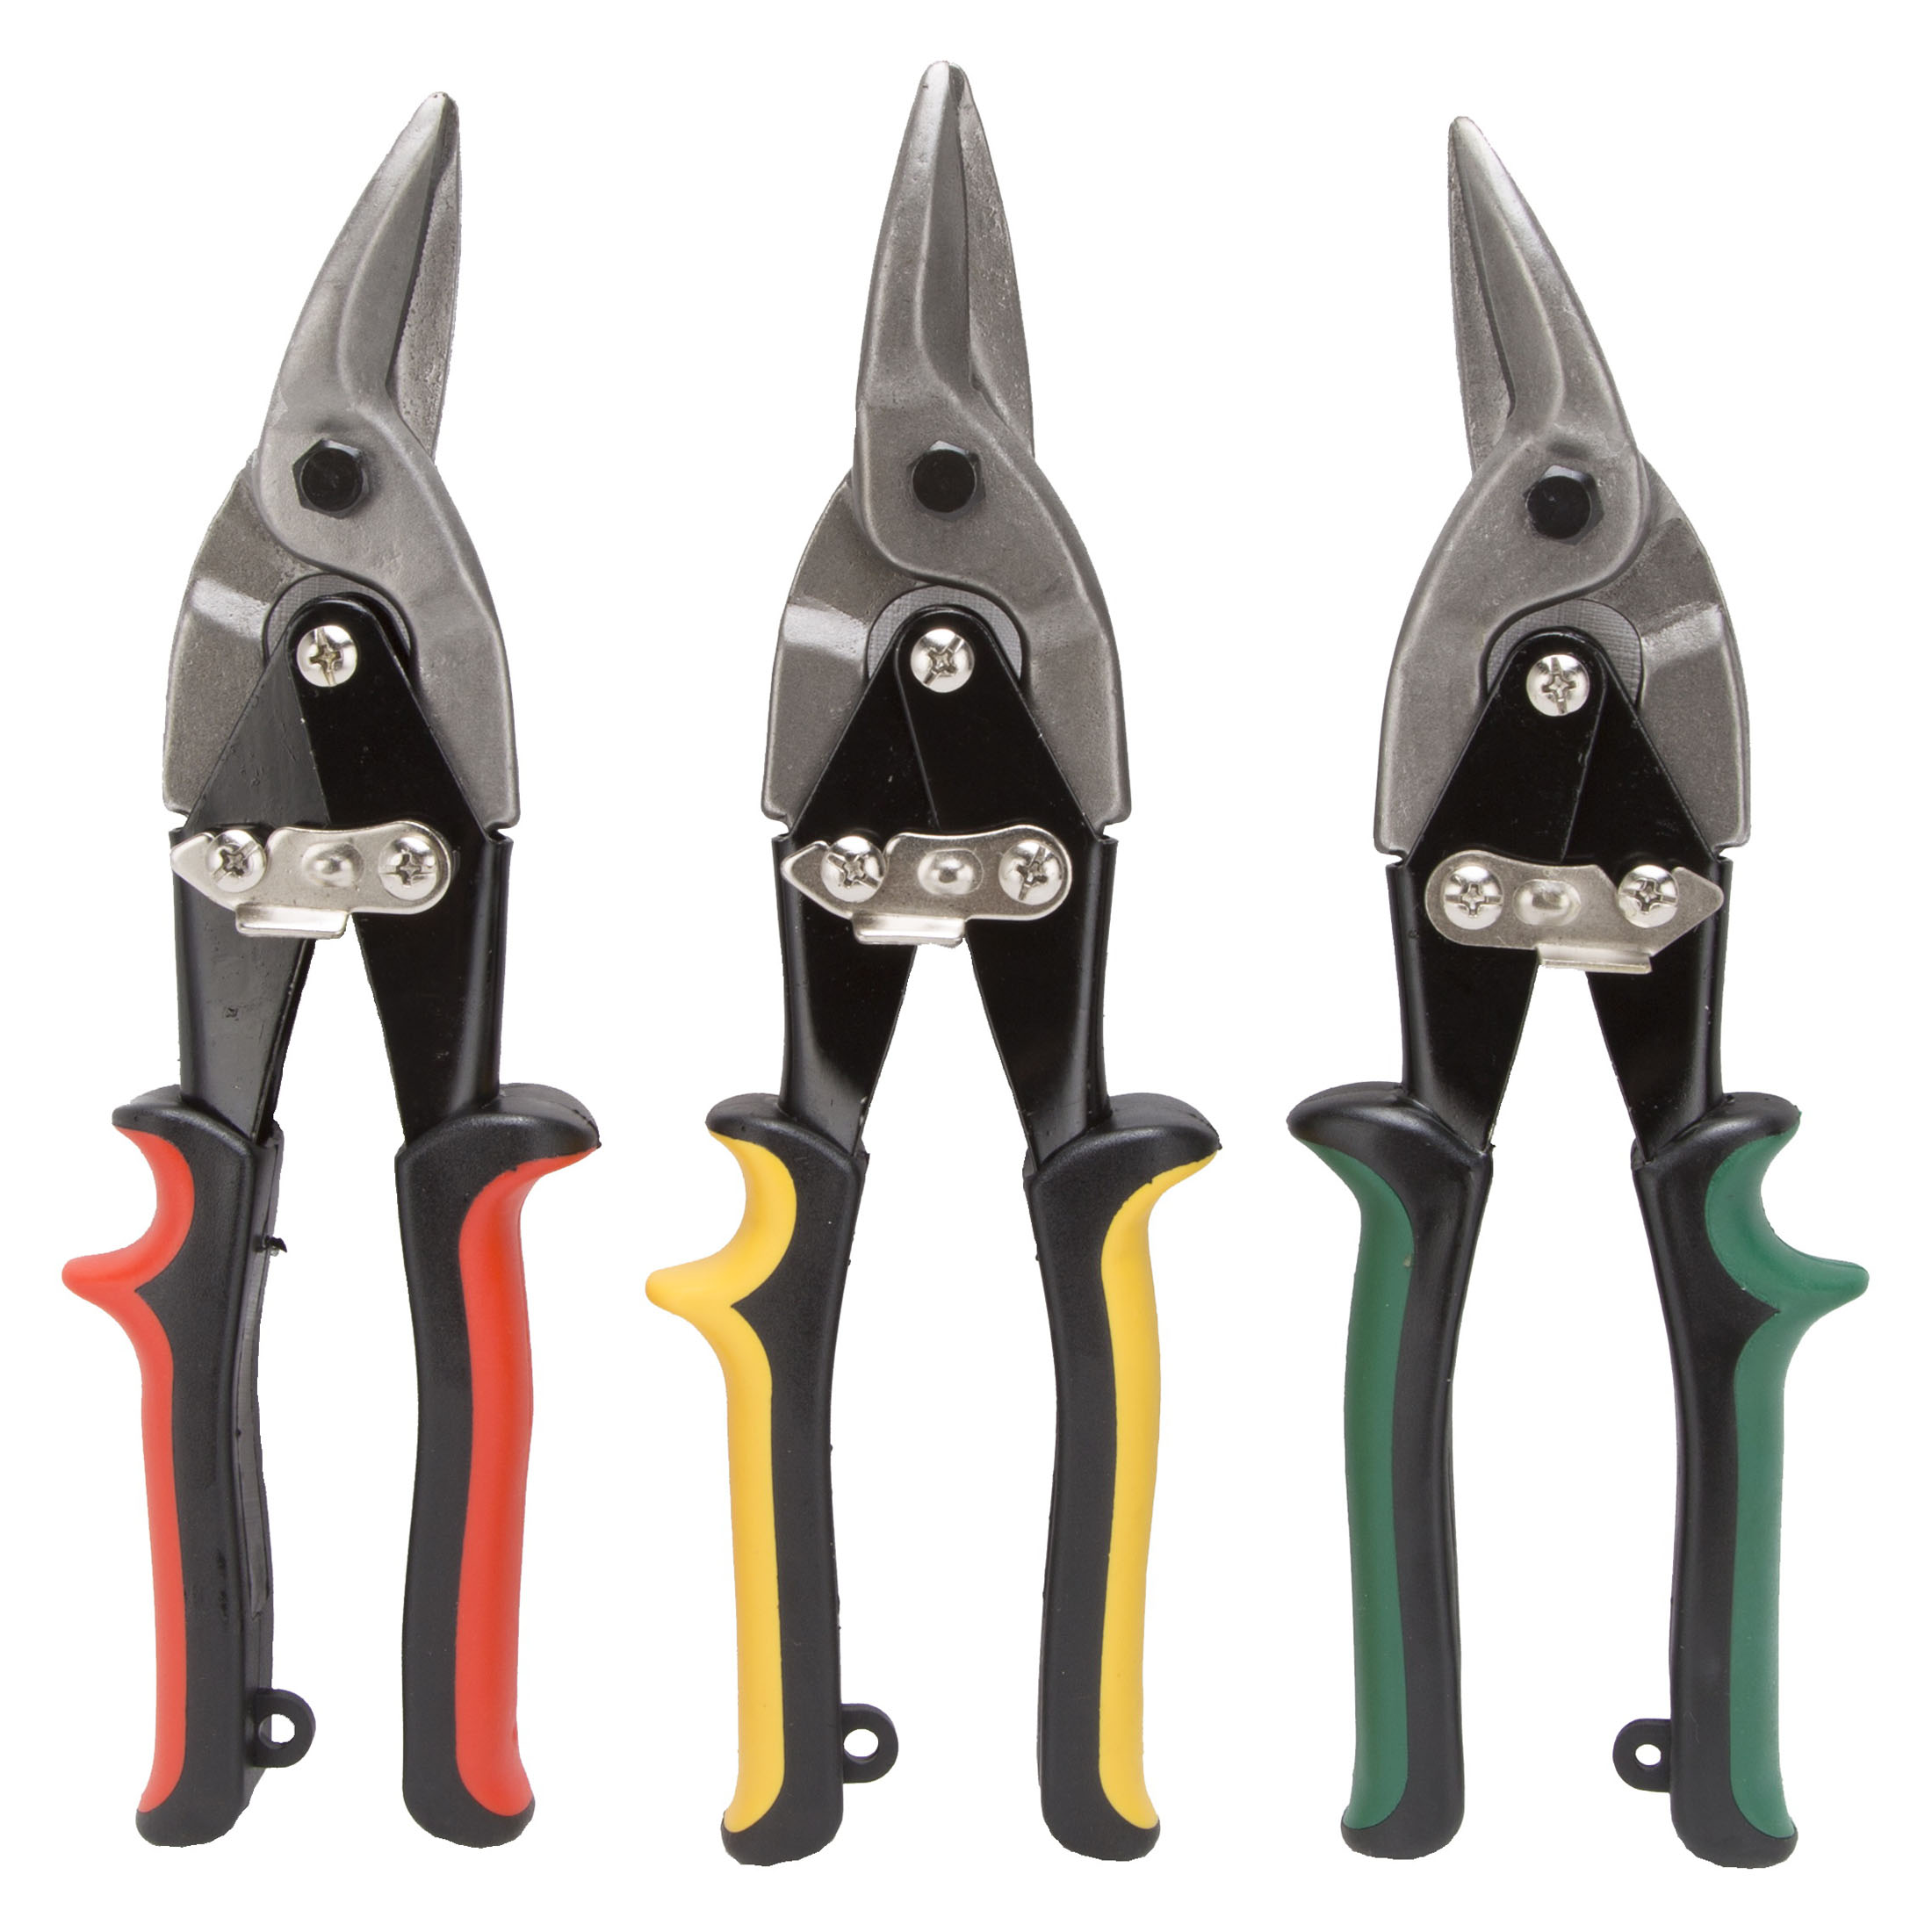 NTS03 Aviation Snips Set, 10-1/8 in OAL, Left/Right/Straight Cut, Carbon Steel Blade, Cushion Grip Handle